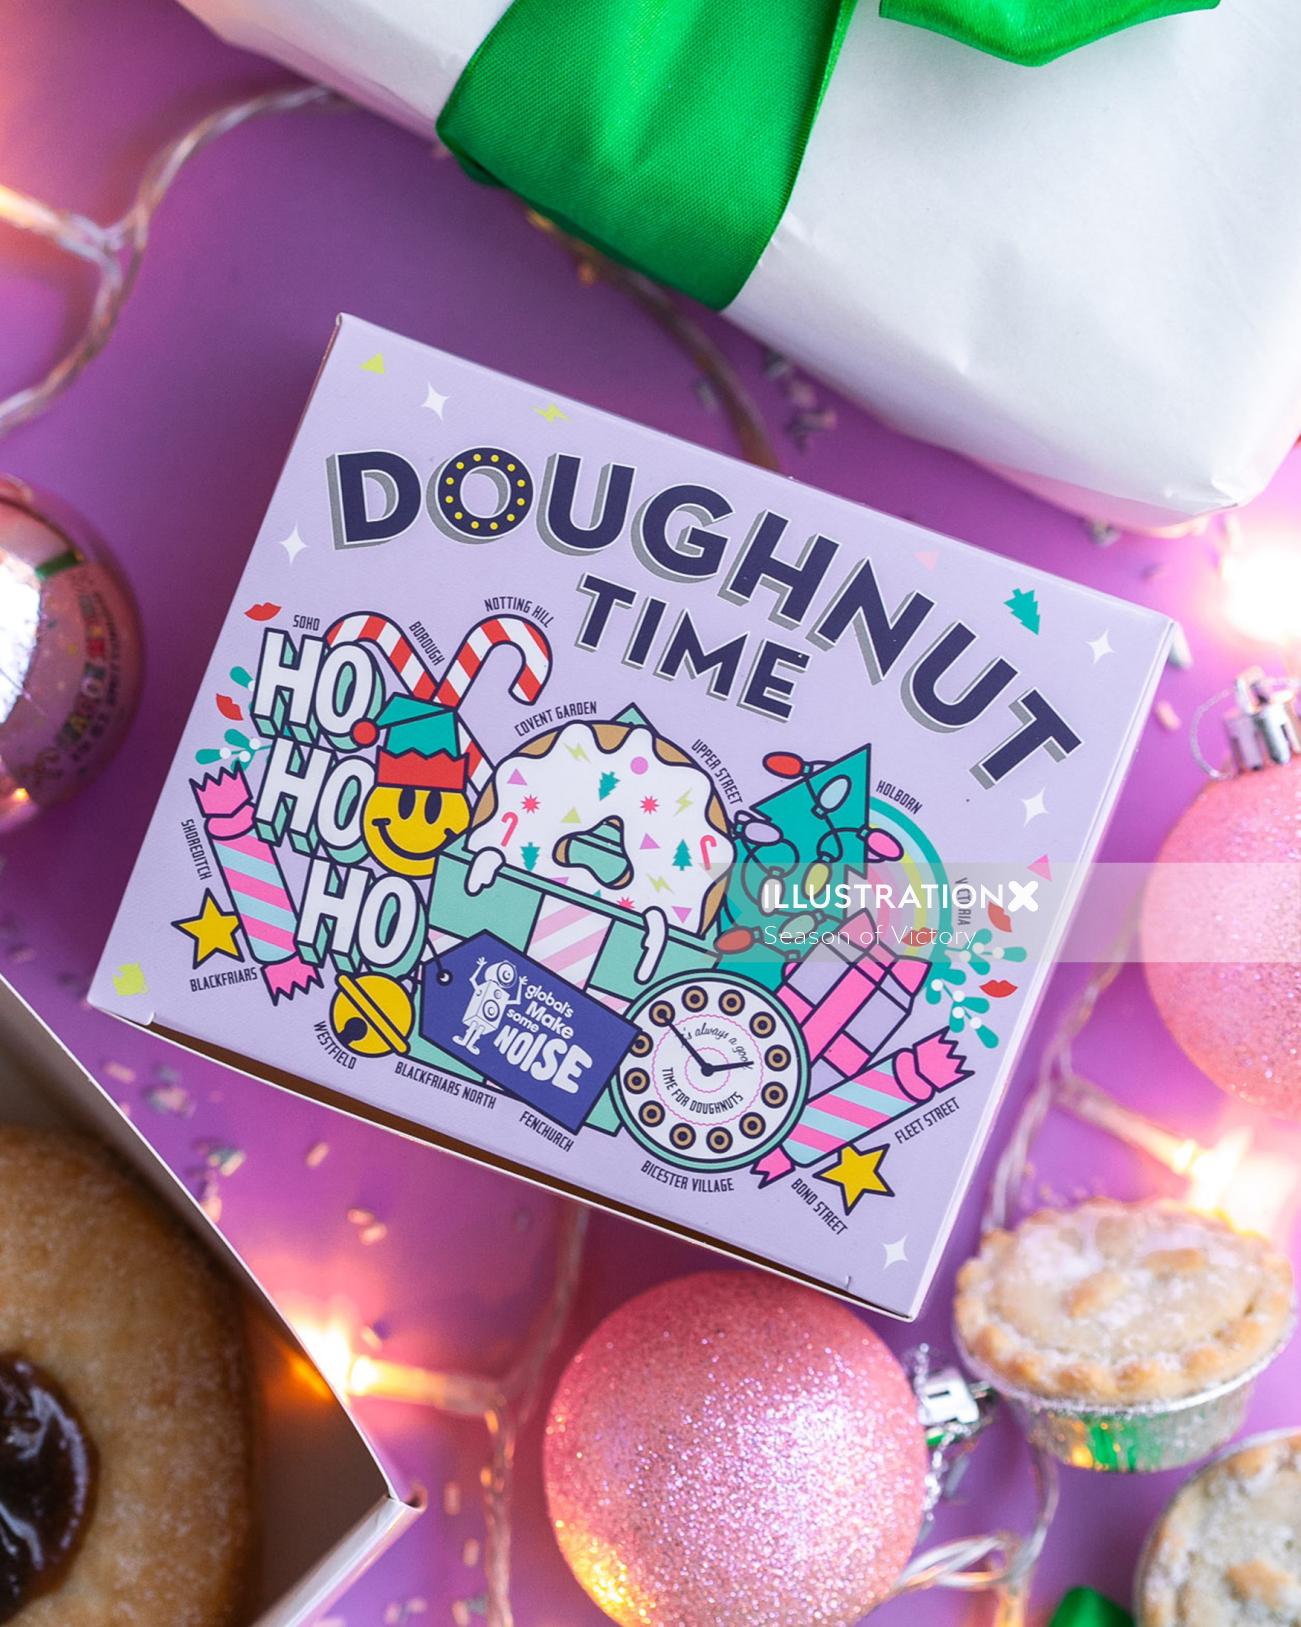 christmas, doughnut, shop, packaging, holiday, merry christmas, doughnut, food, sweets, treats, cand